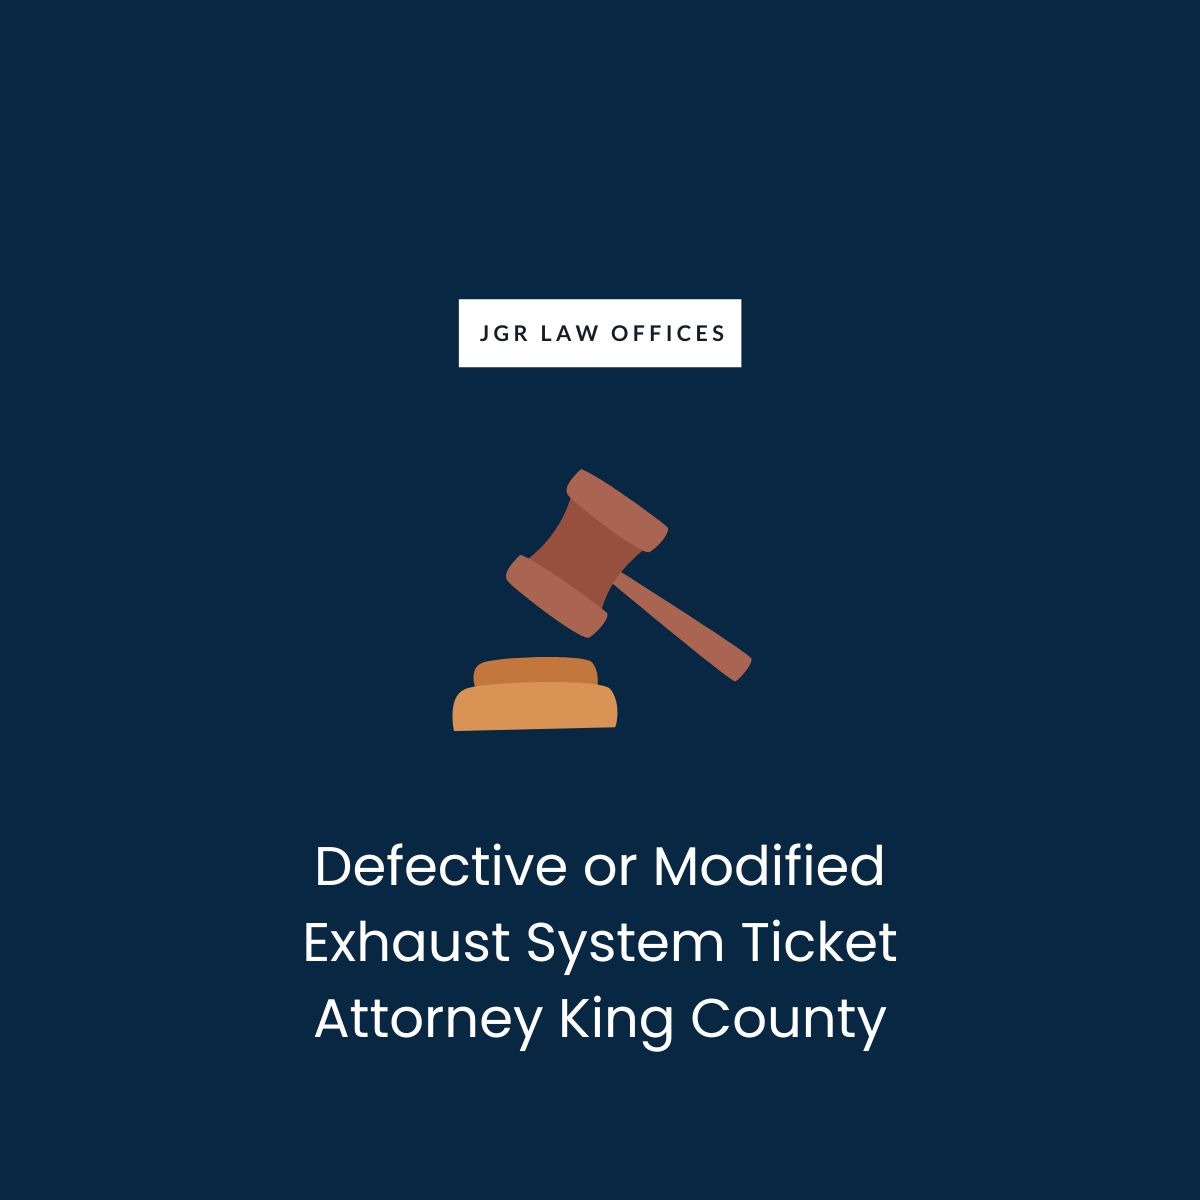 Defective or Modified Exhaust System Ticket Attorney King County